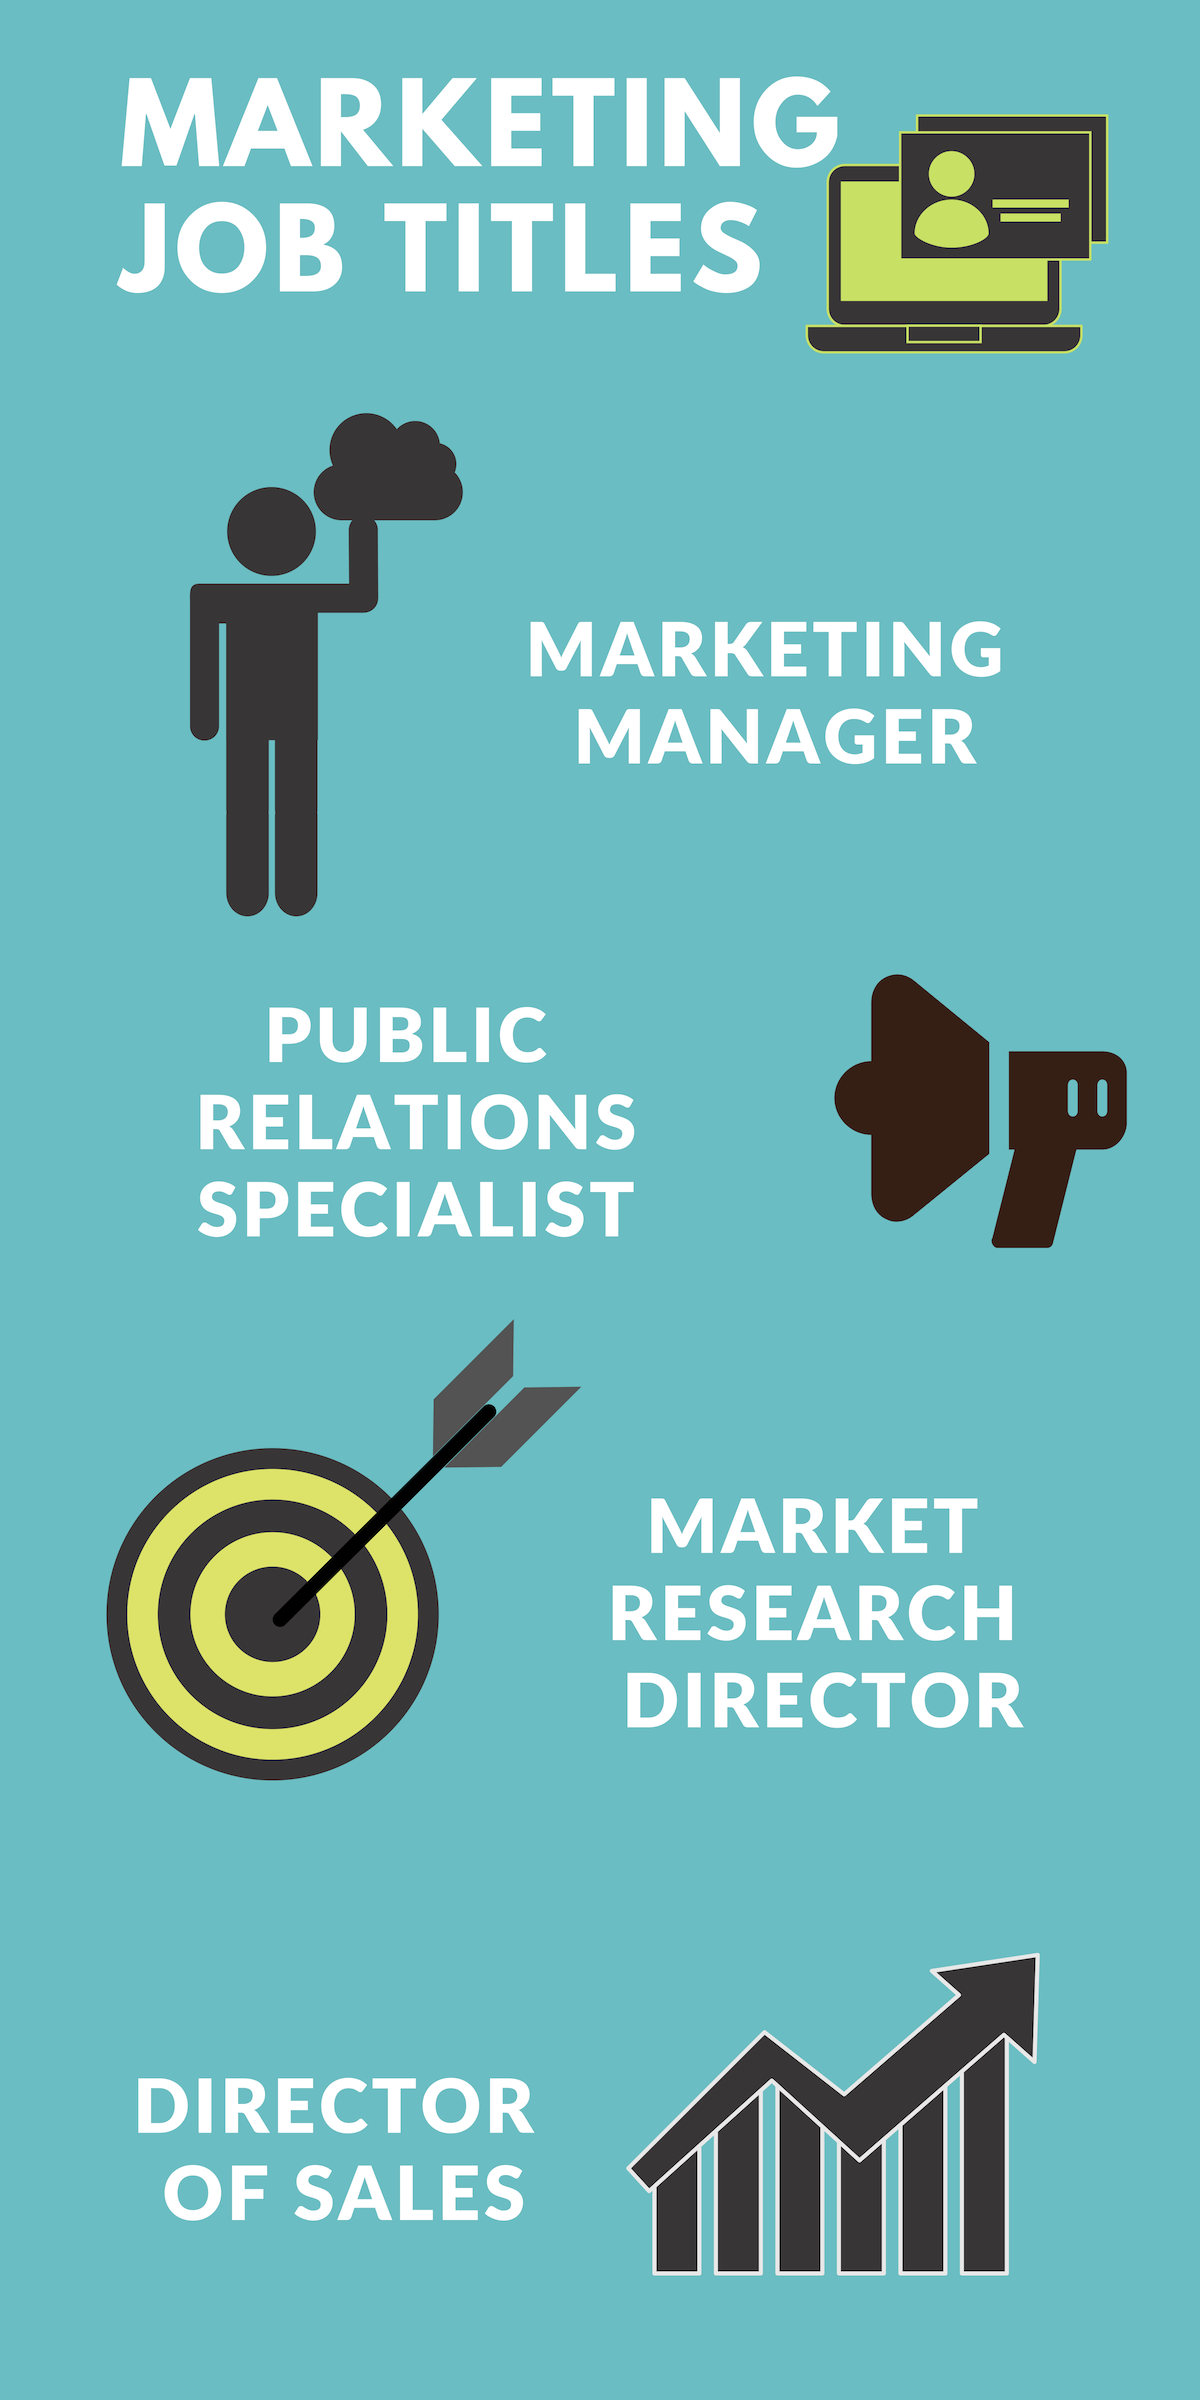 Marketing Job Titles: Marketing Manager, Public Relations Specialist, Market Research Director, Director Of Sales